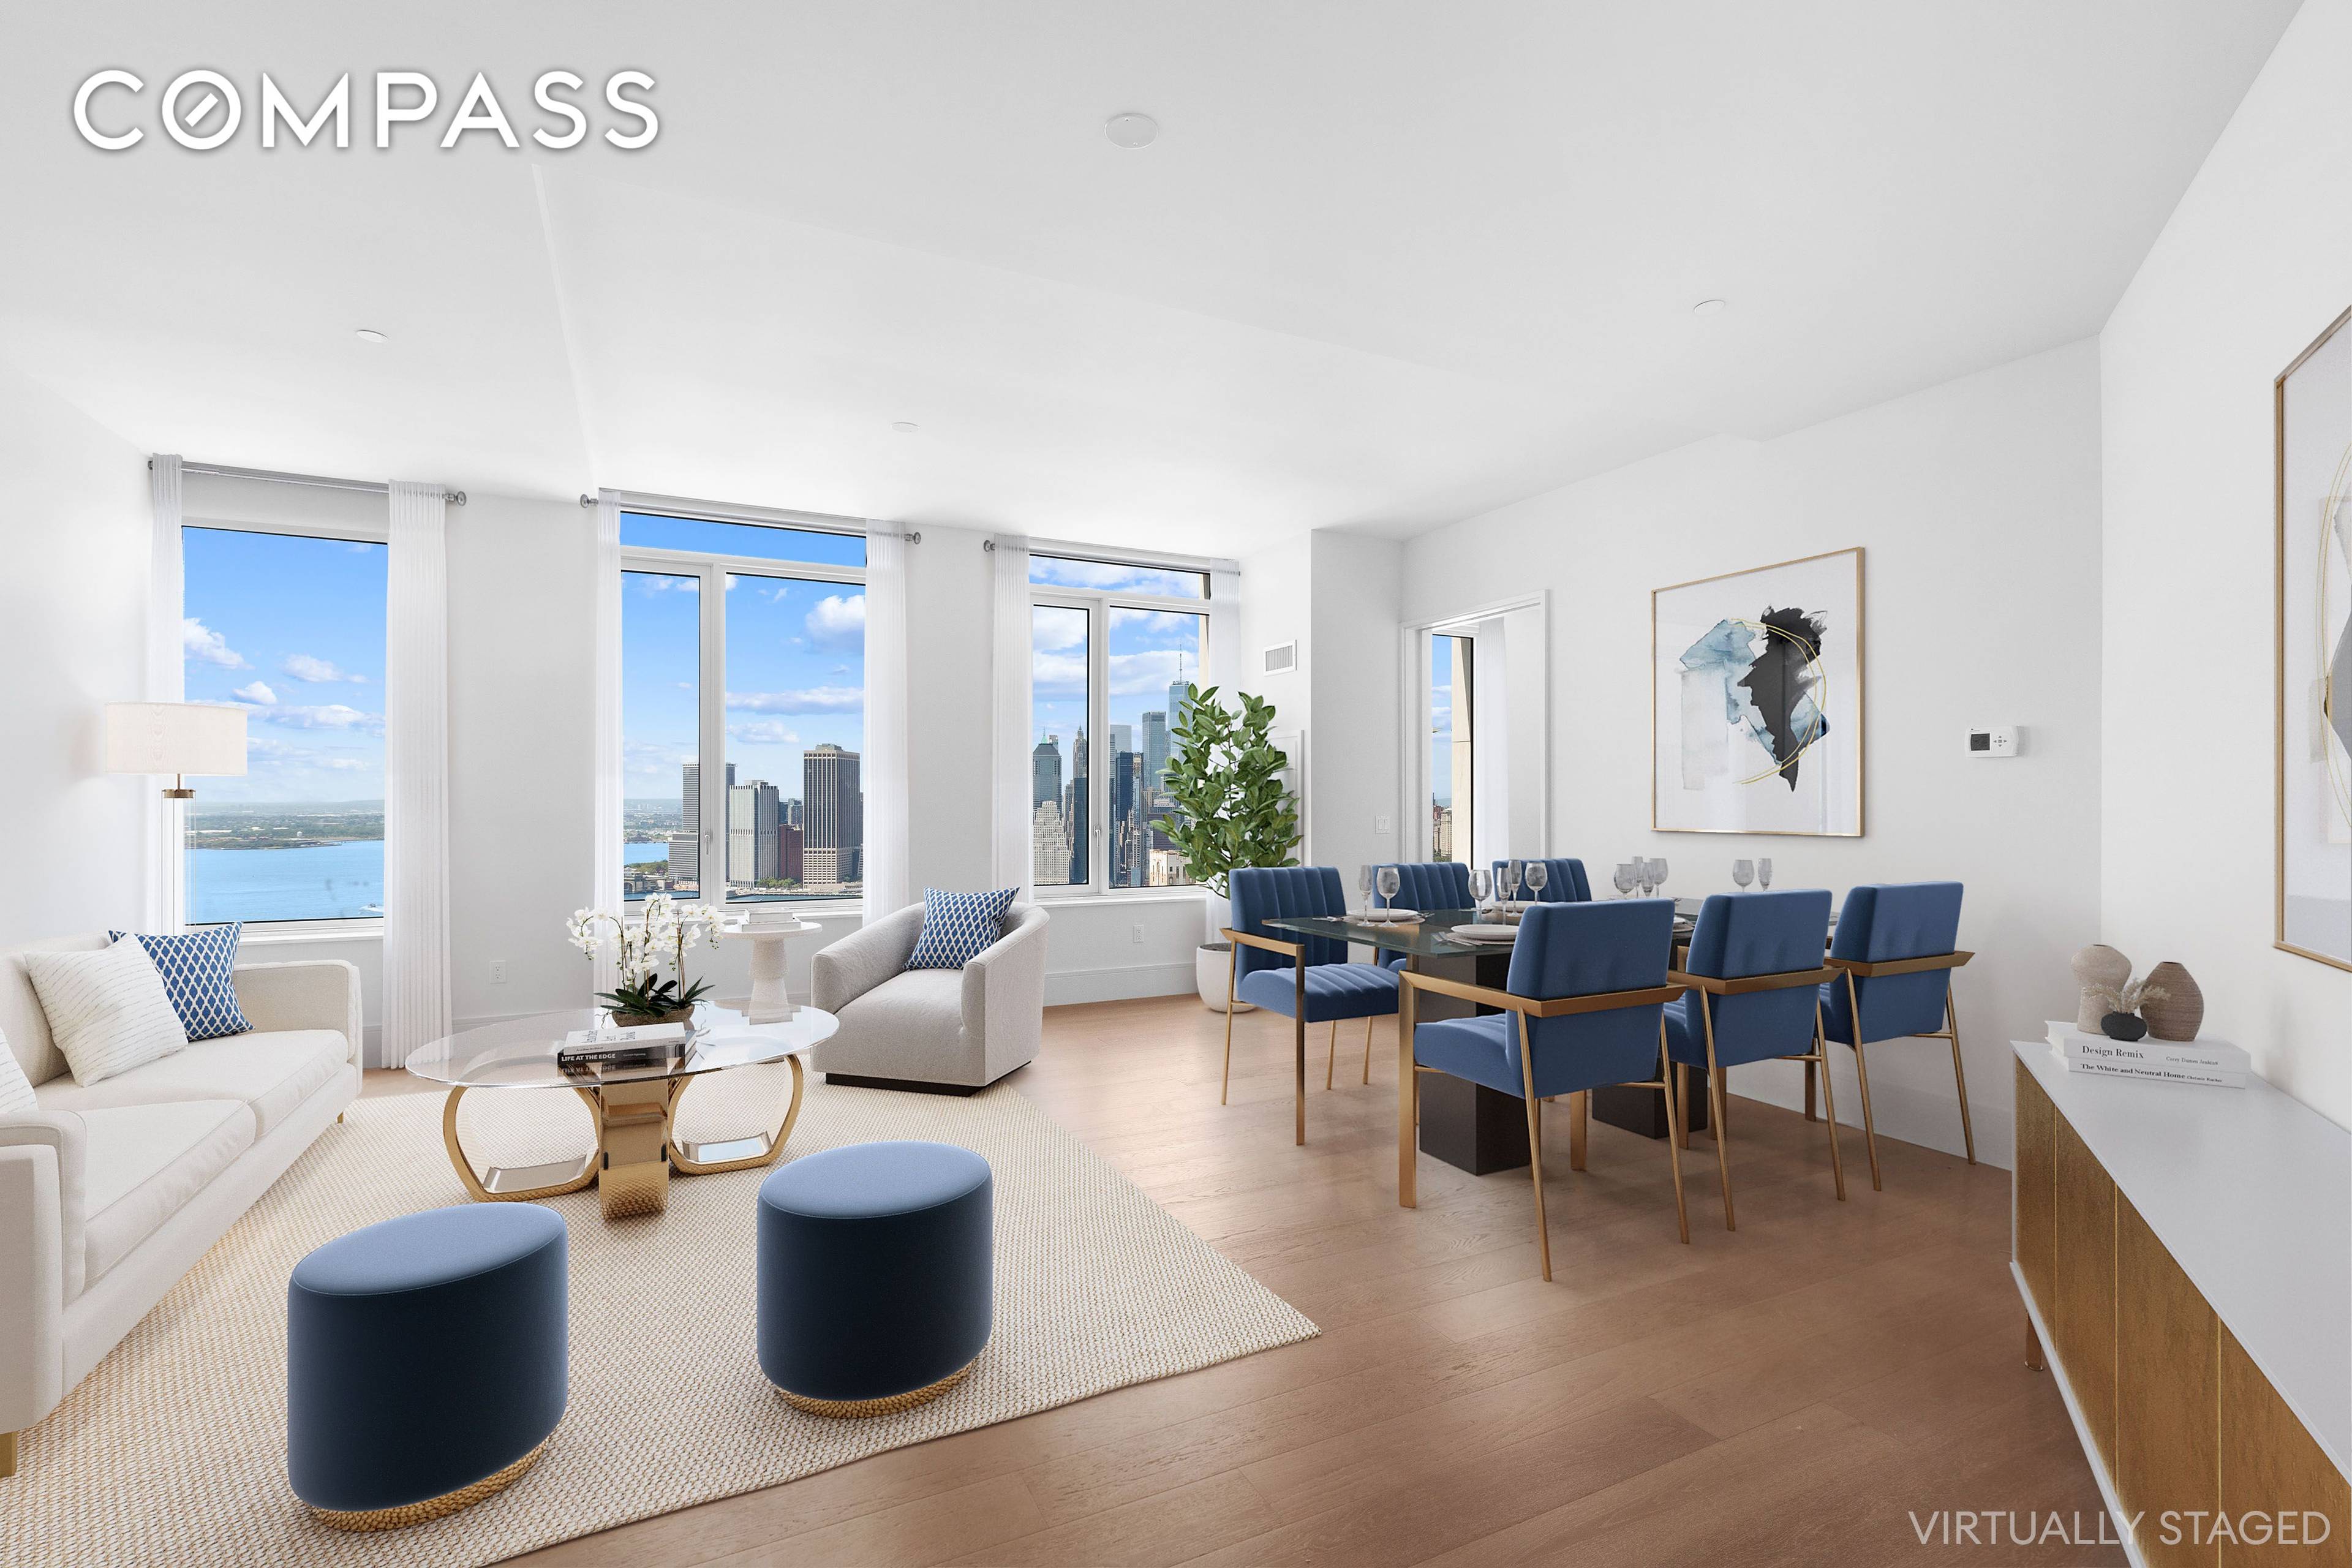 High above it all in Brooklyn's most exciting new development, this pristine two bedroom, two and a half bathroom residence features a sweeping floor plan, luxurious finishes, and truly mesmerizing ...